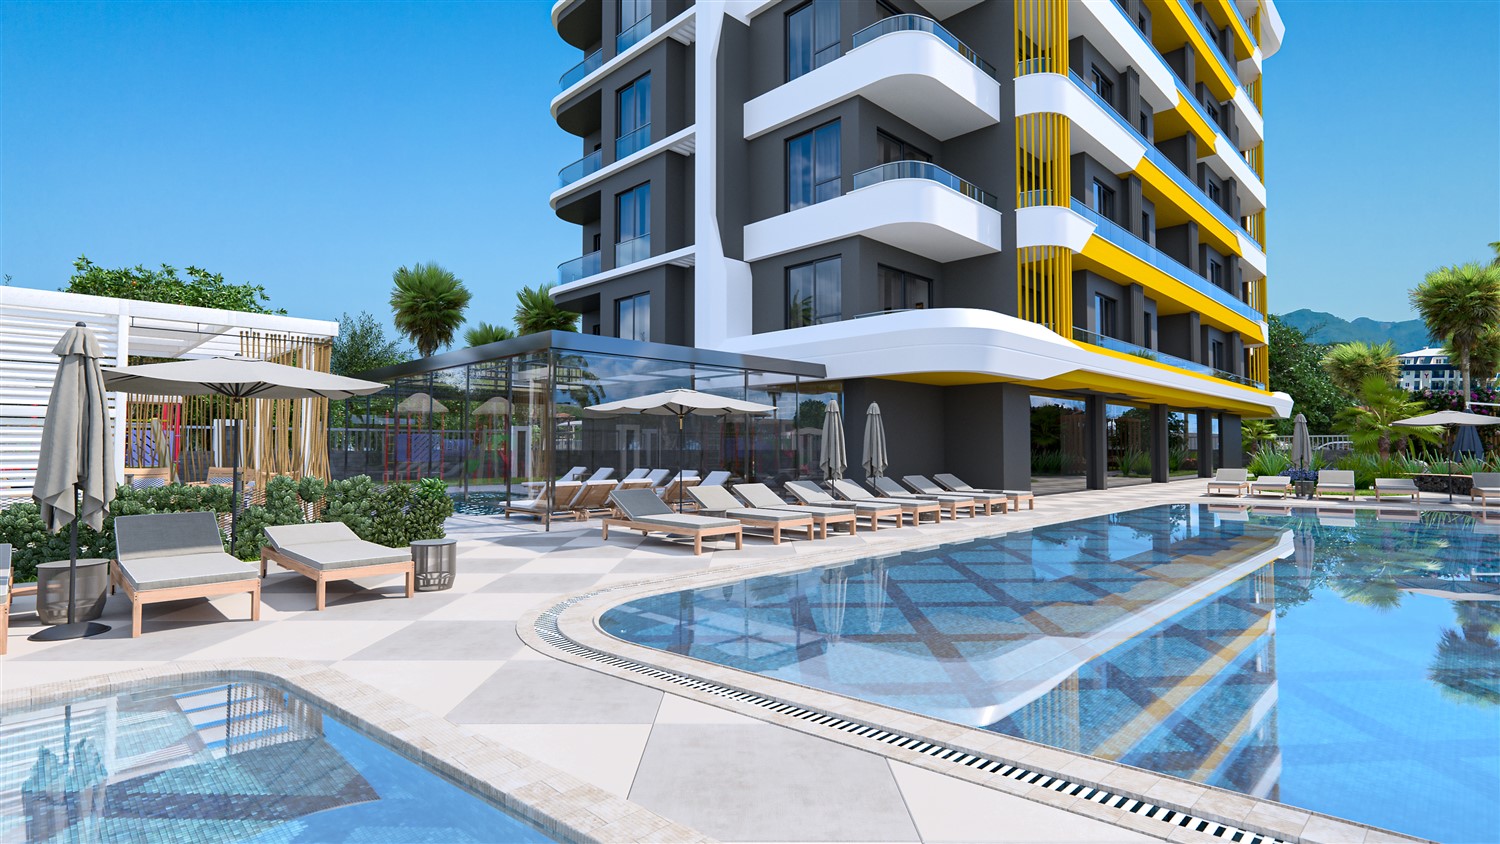 New residential complex with breathtaking views of the sea coast, located in the resort town of Gazipasa